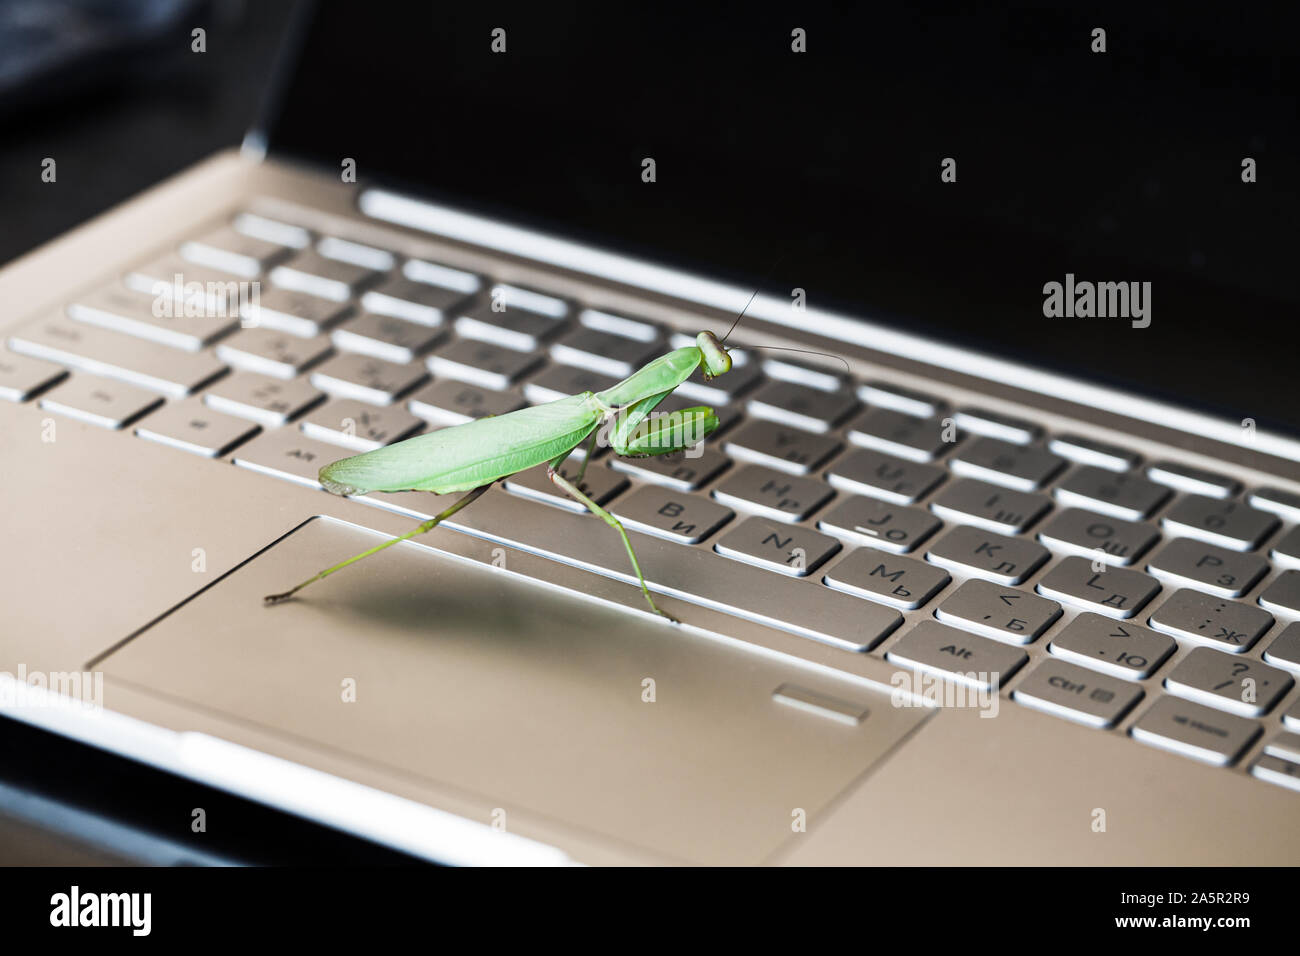 Computer bug metaphor, big mantis walks on a laptop keyboard with English and Russian letters Stock Photo